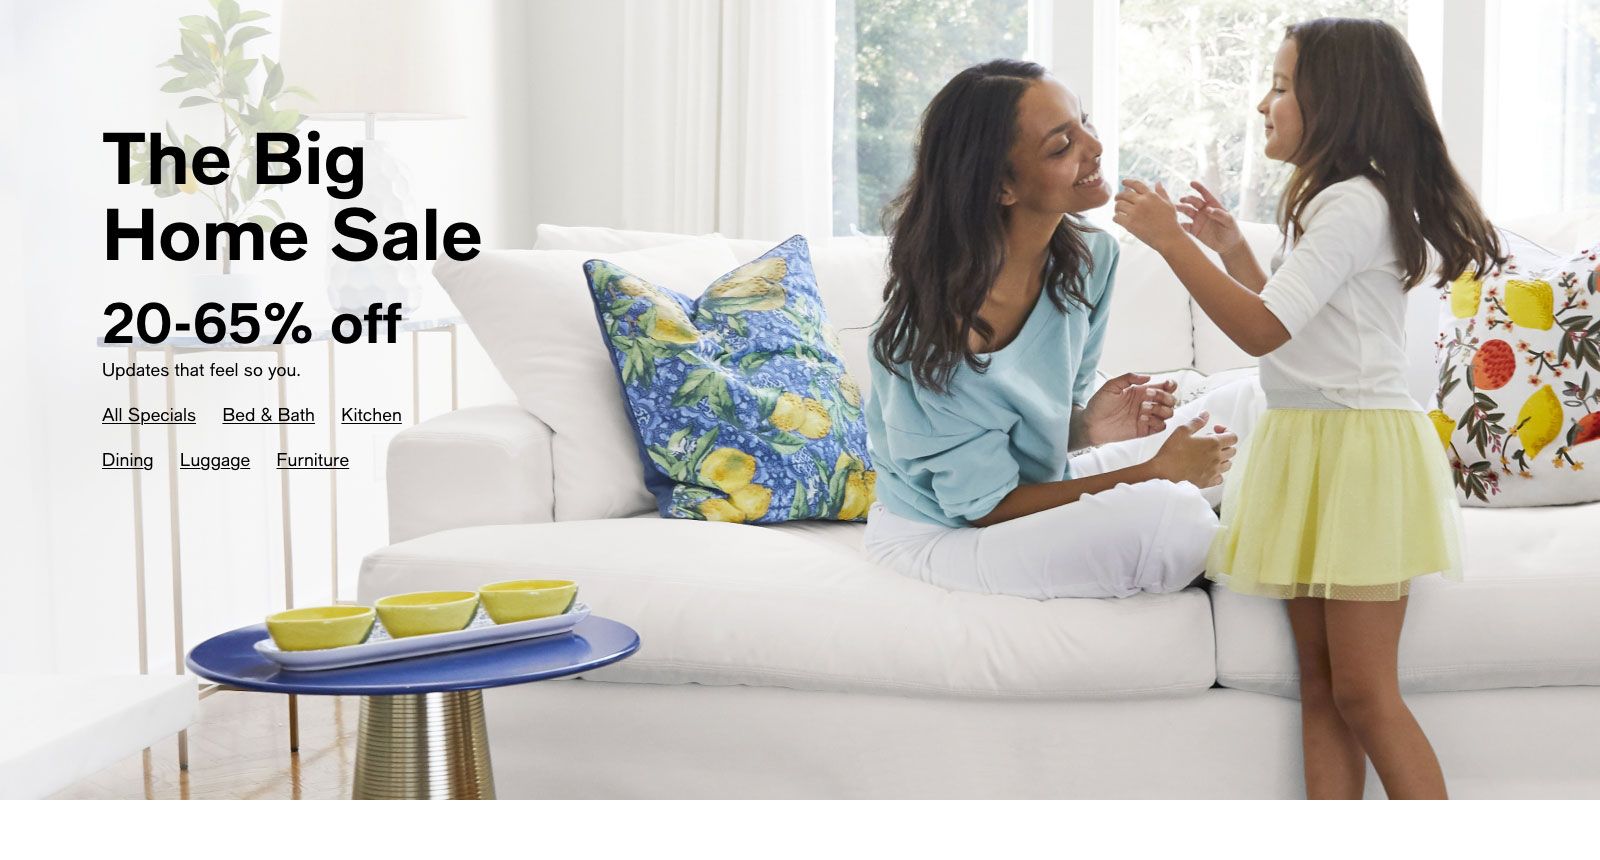 The Big Home Sale, 20-65% off, Update that feel so you